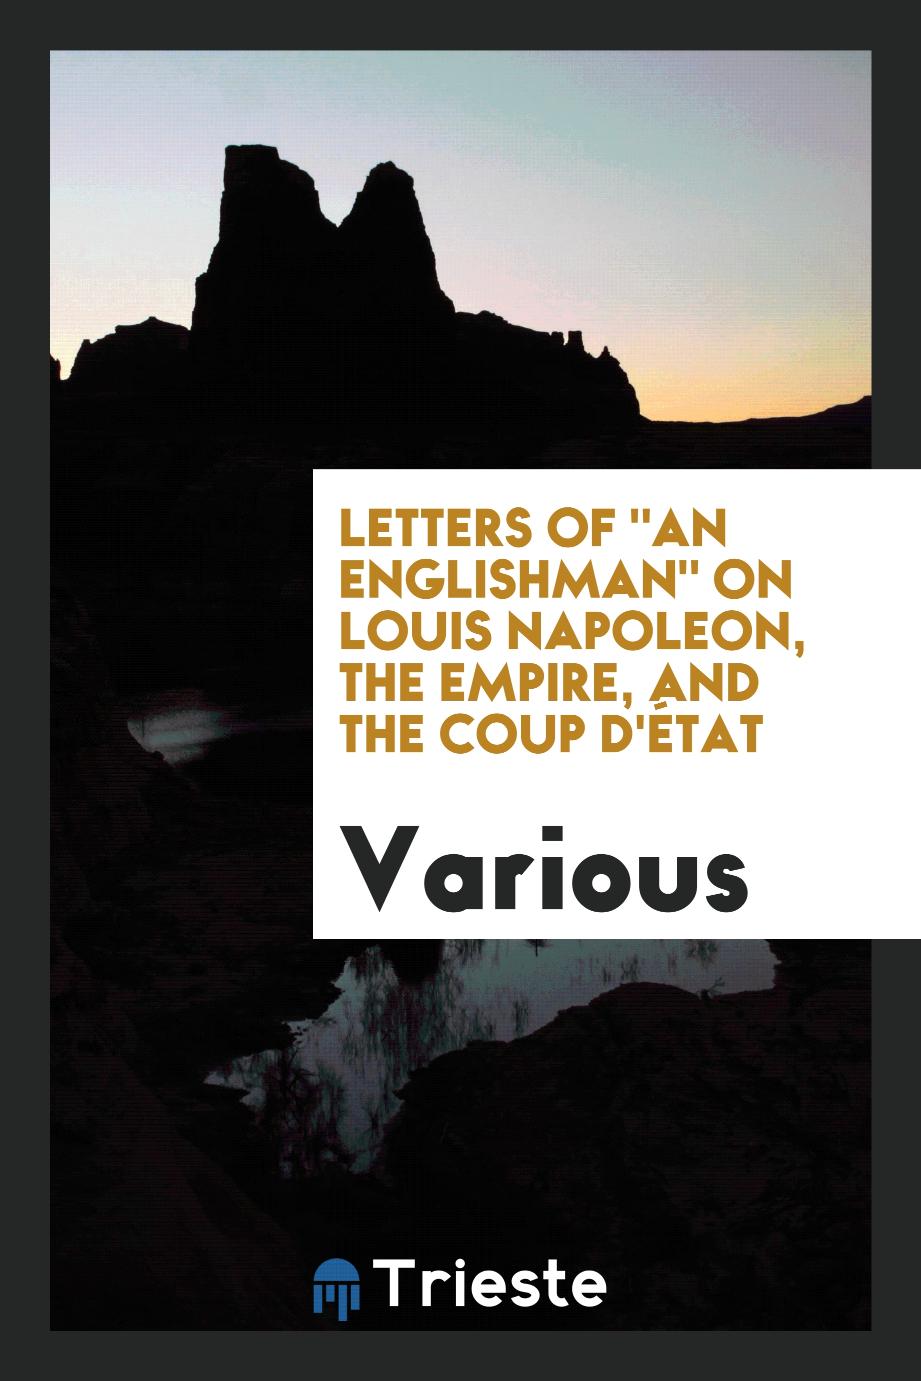 Letters Of "An Englishman" on Louis Napoleon, the Empire, and the Coup D'état